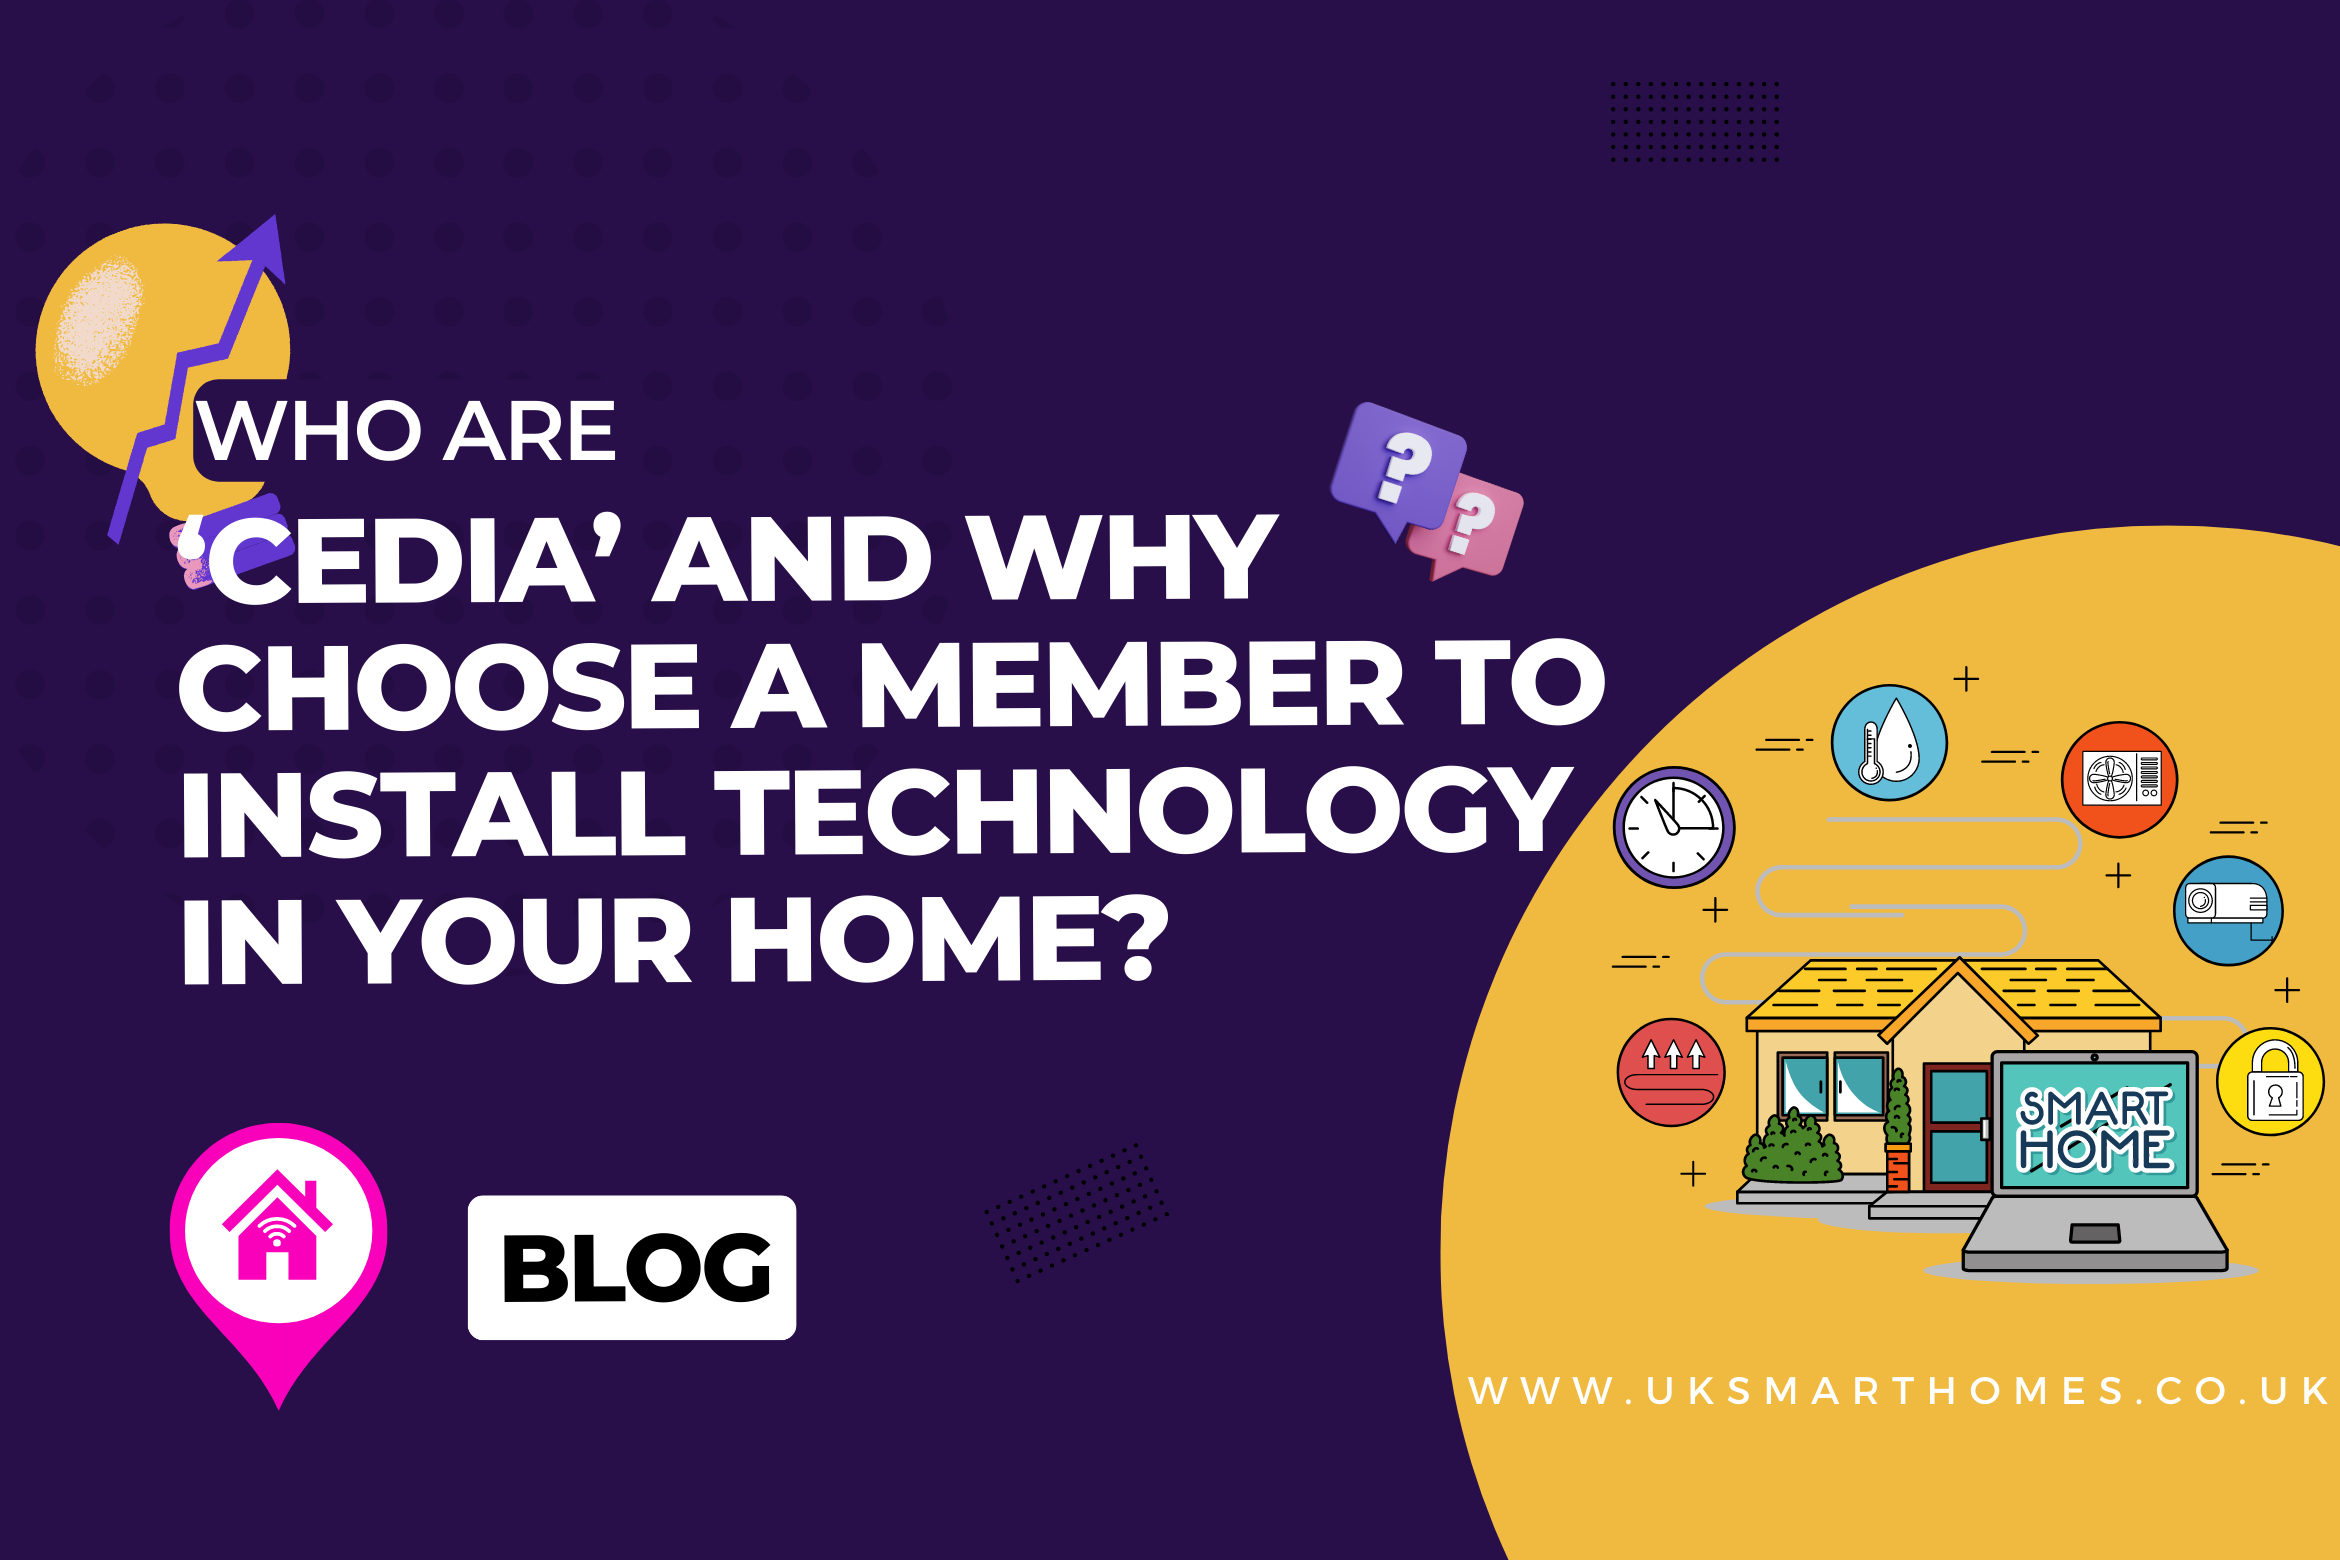 Who are ‘CEDIA’ and why choose a member to install technology in your home?